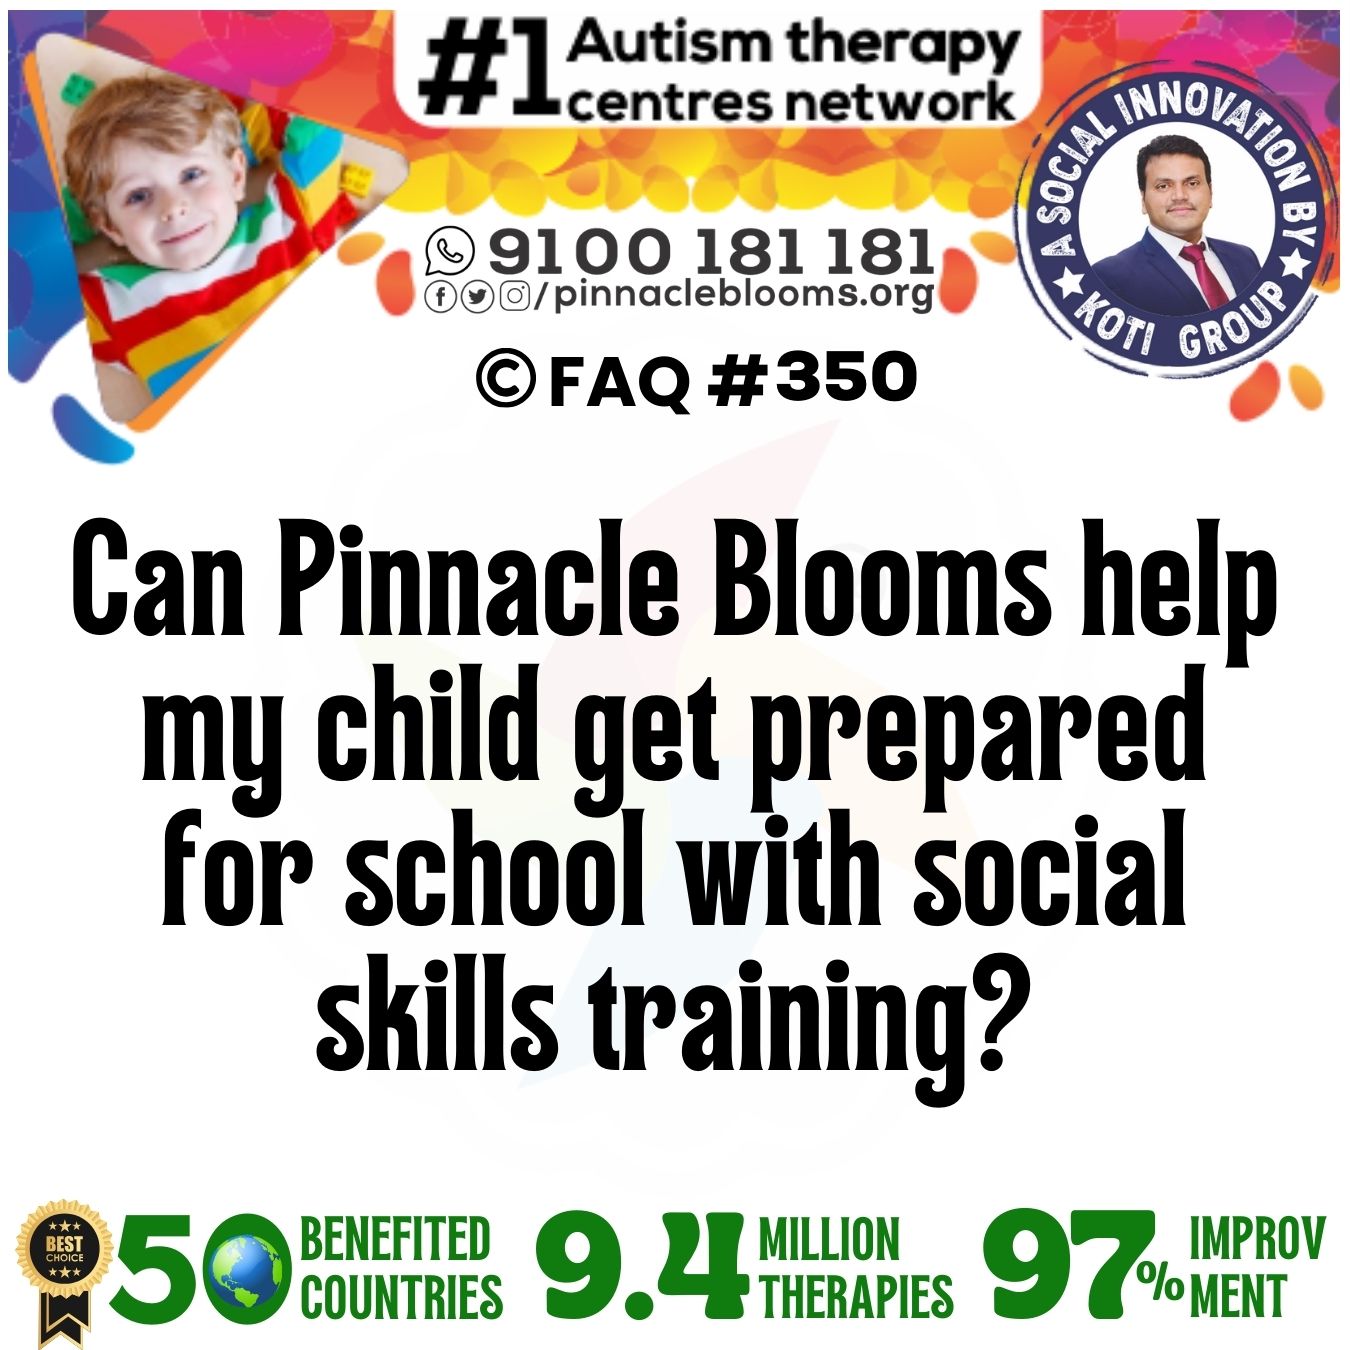 Can Pinnacle Blooms help my child get prepared for school with social skills training?